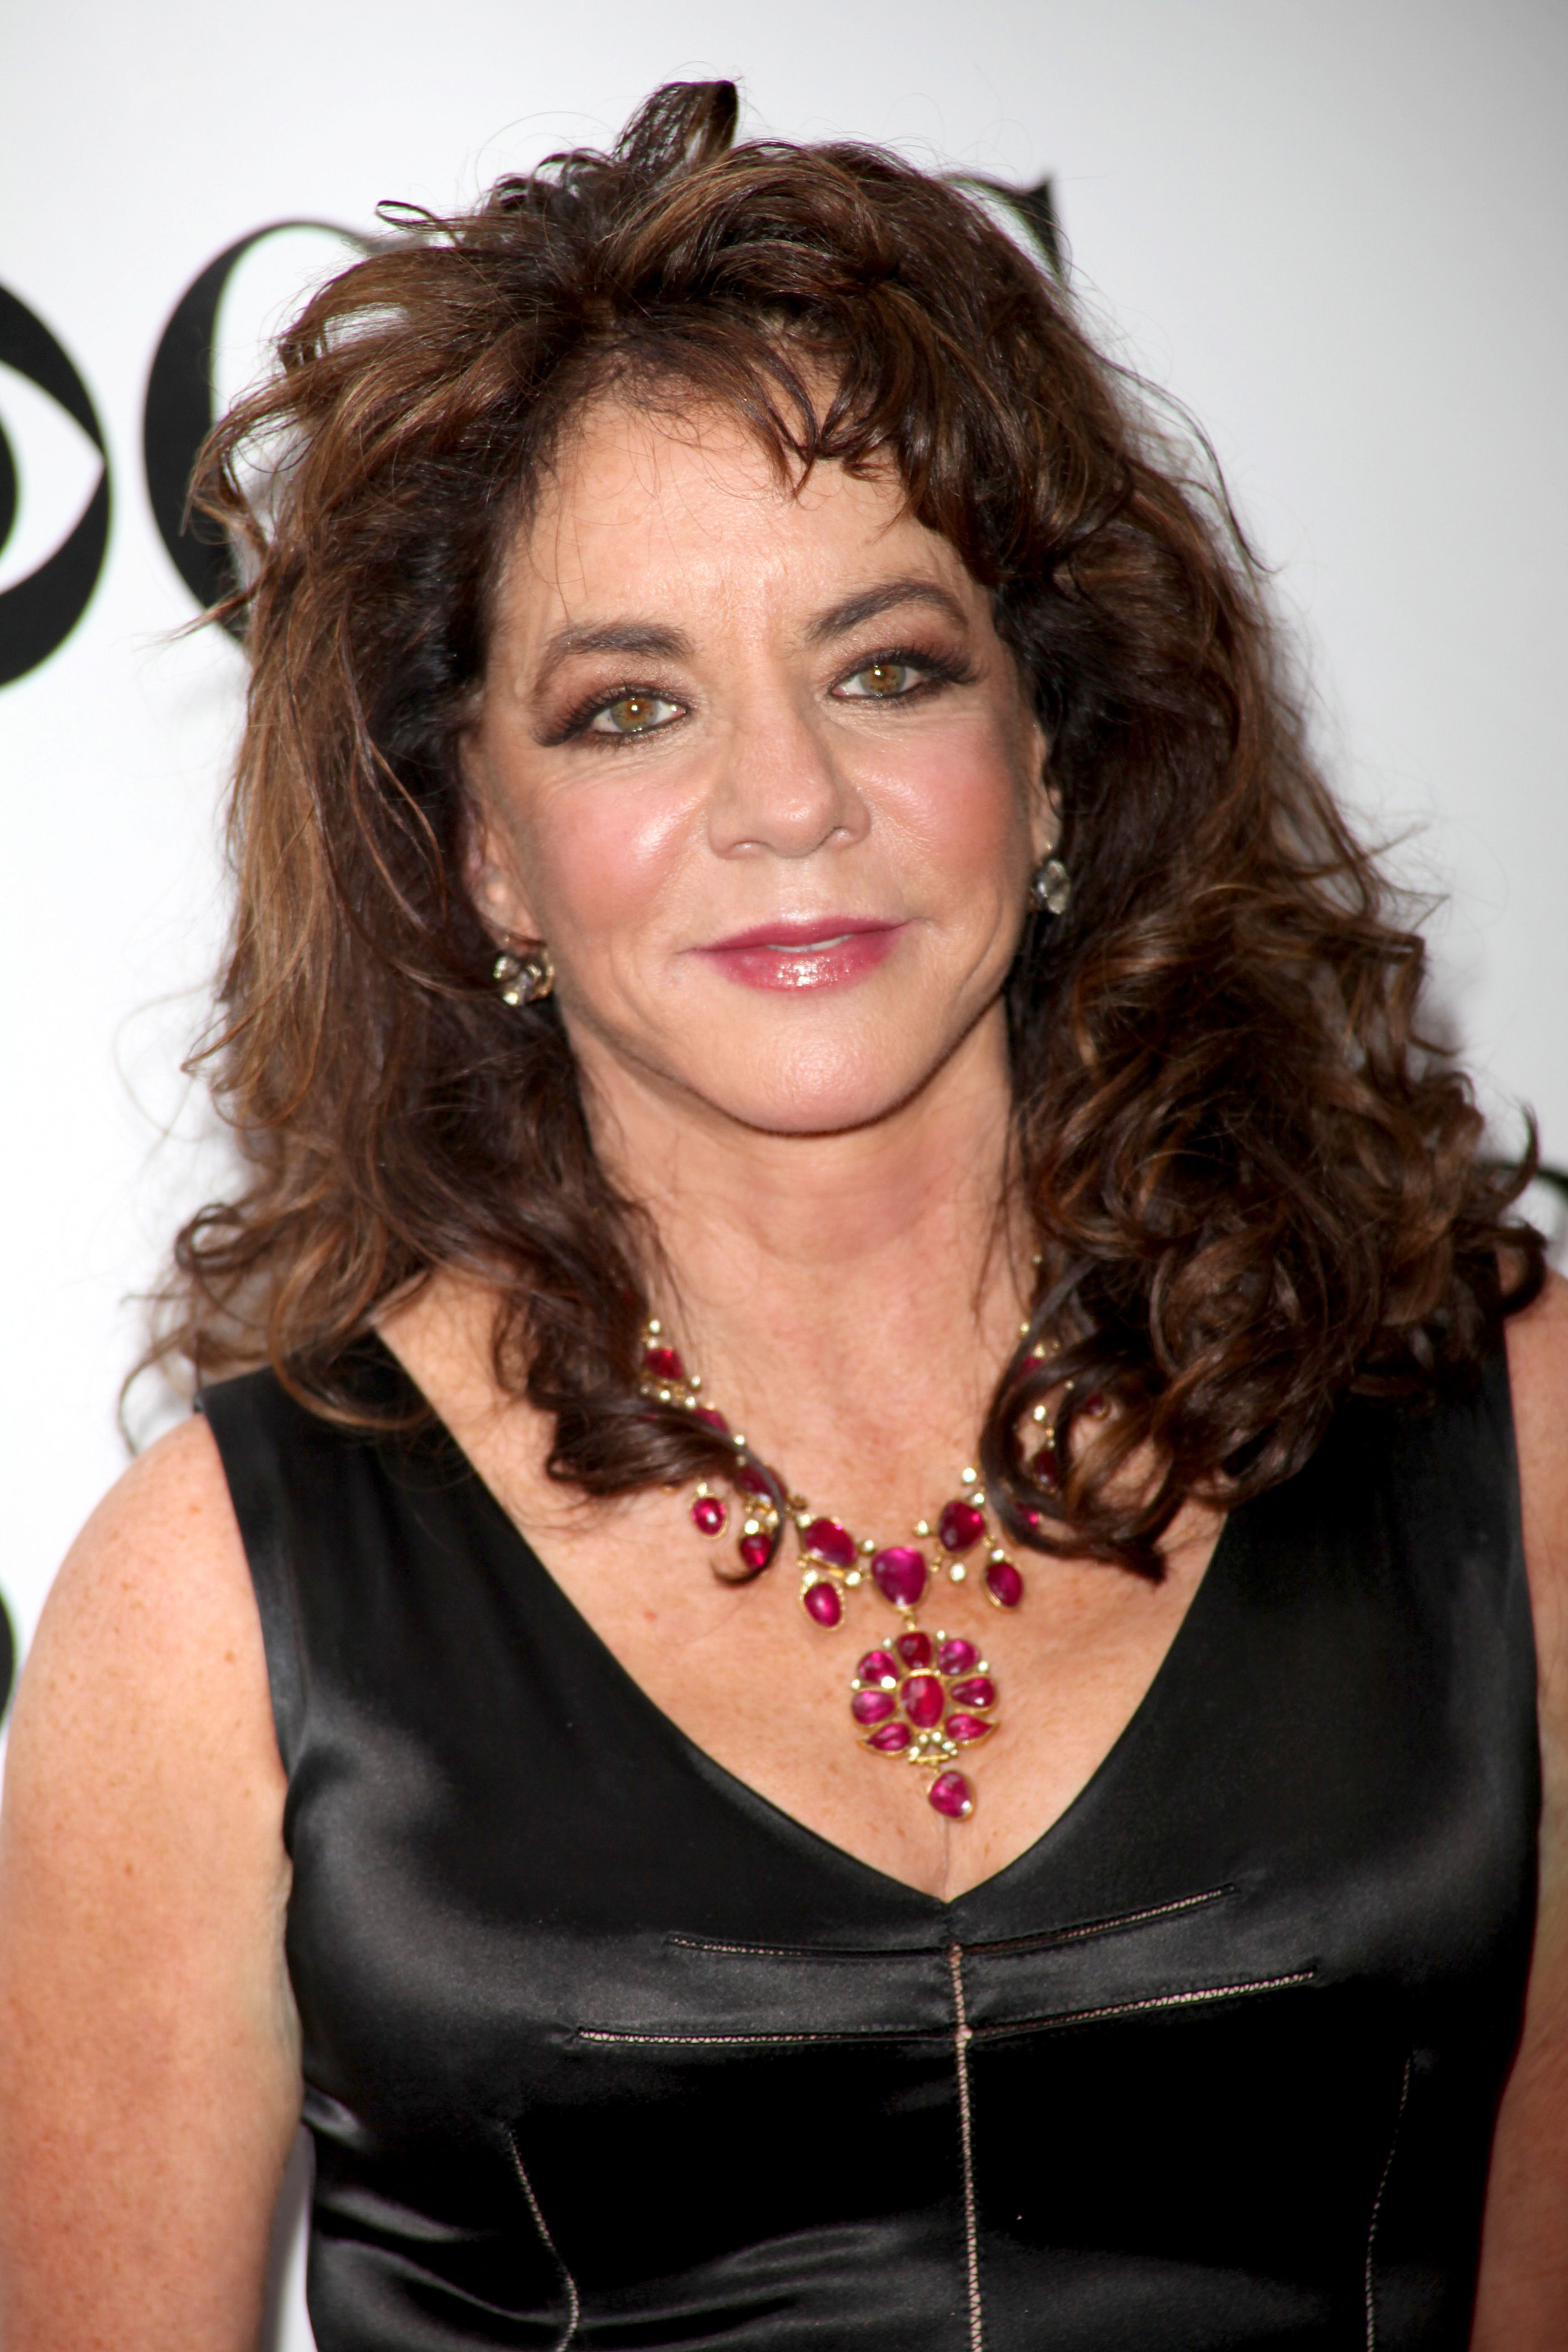 How tall is Stockard Channing?